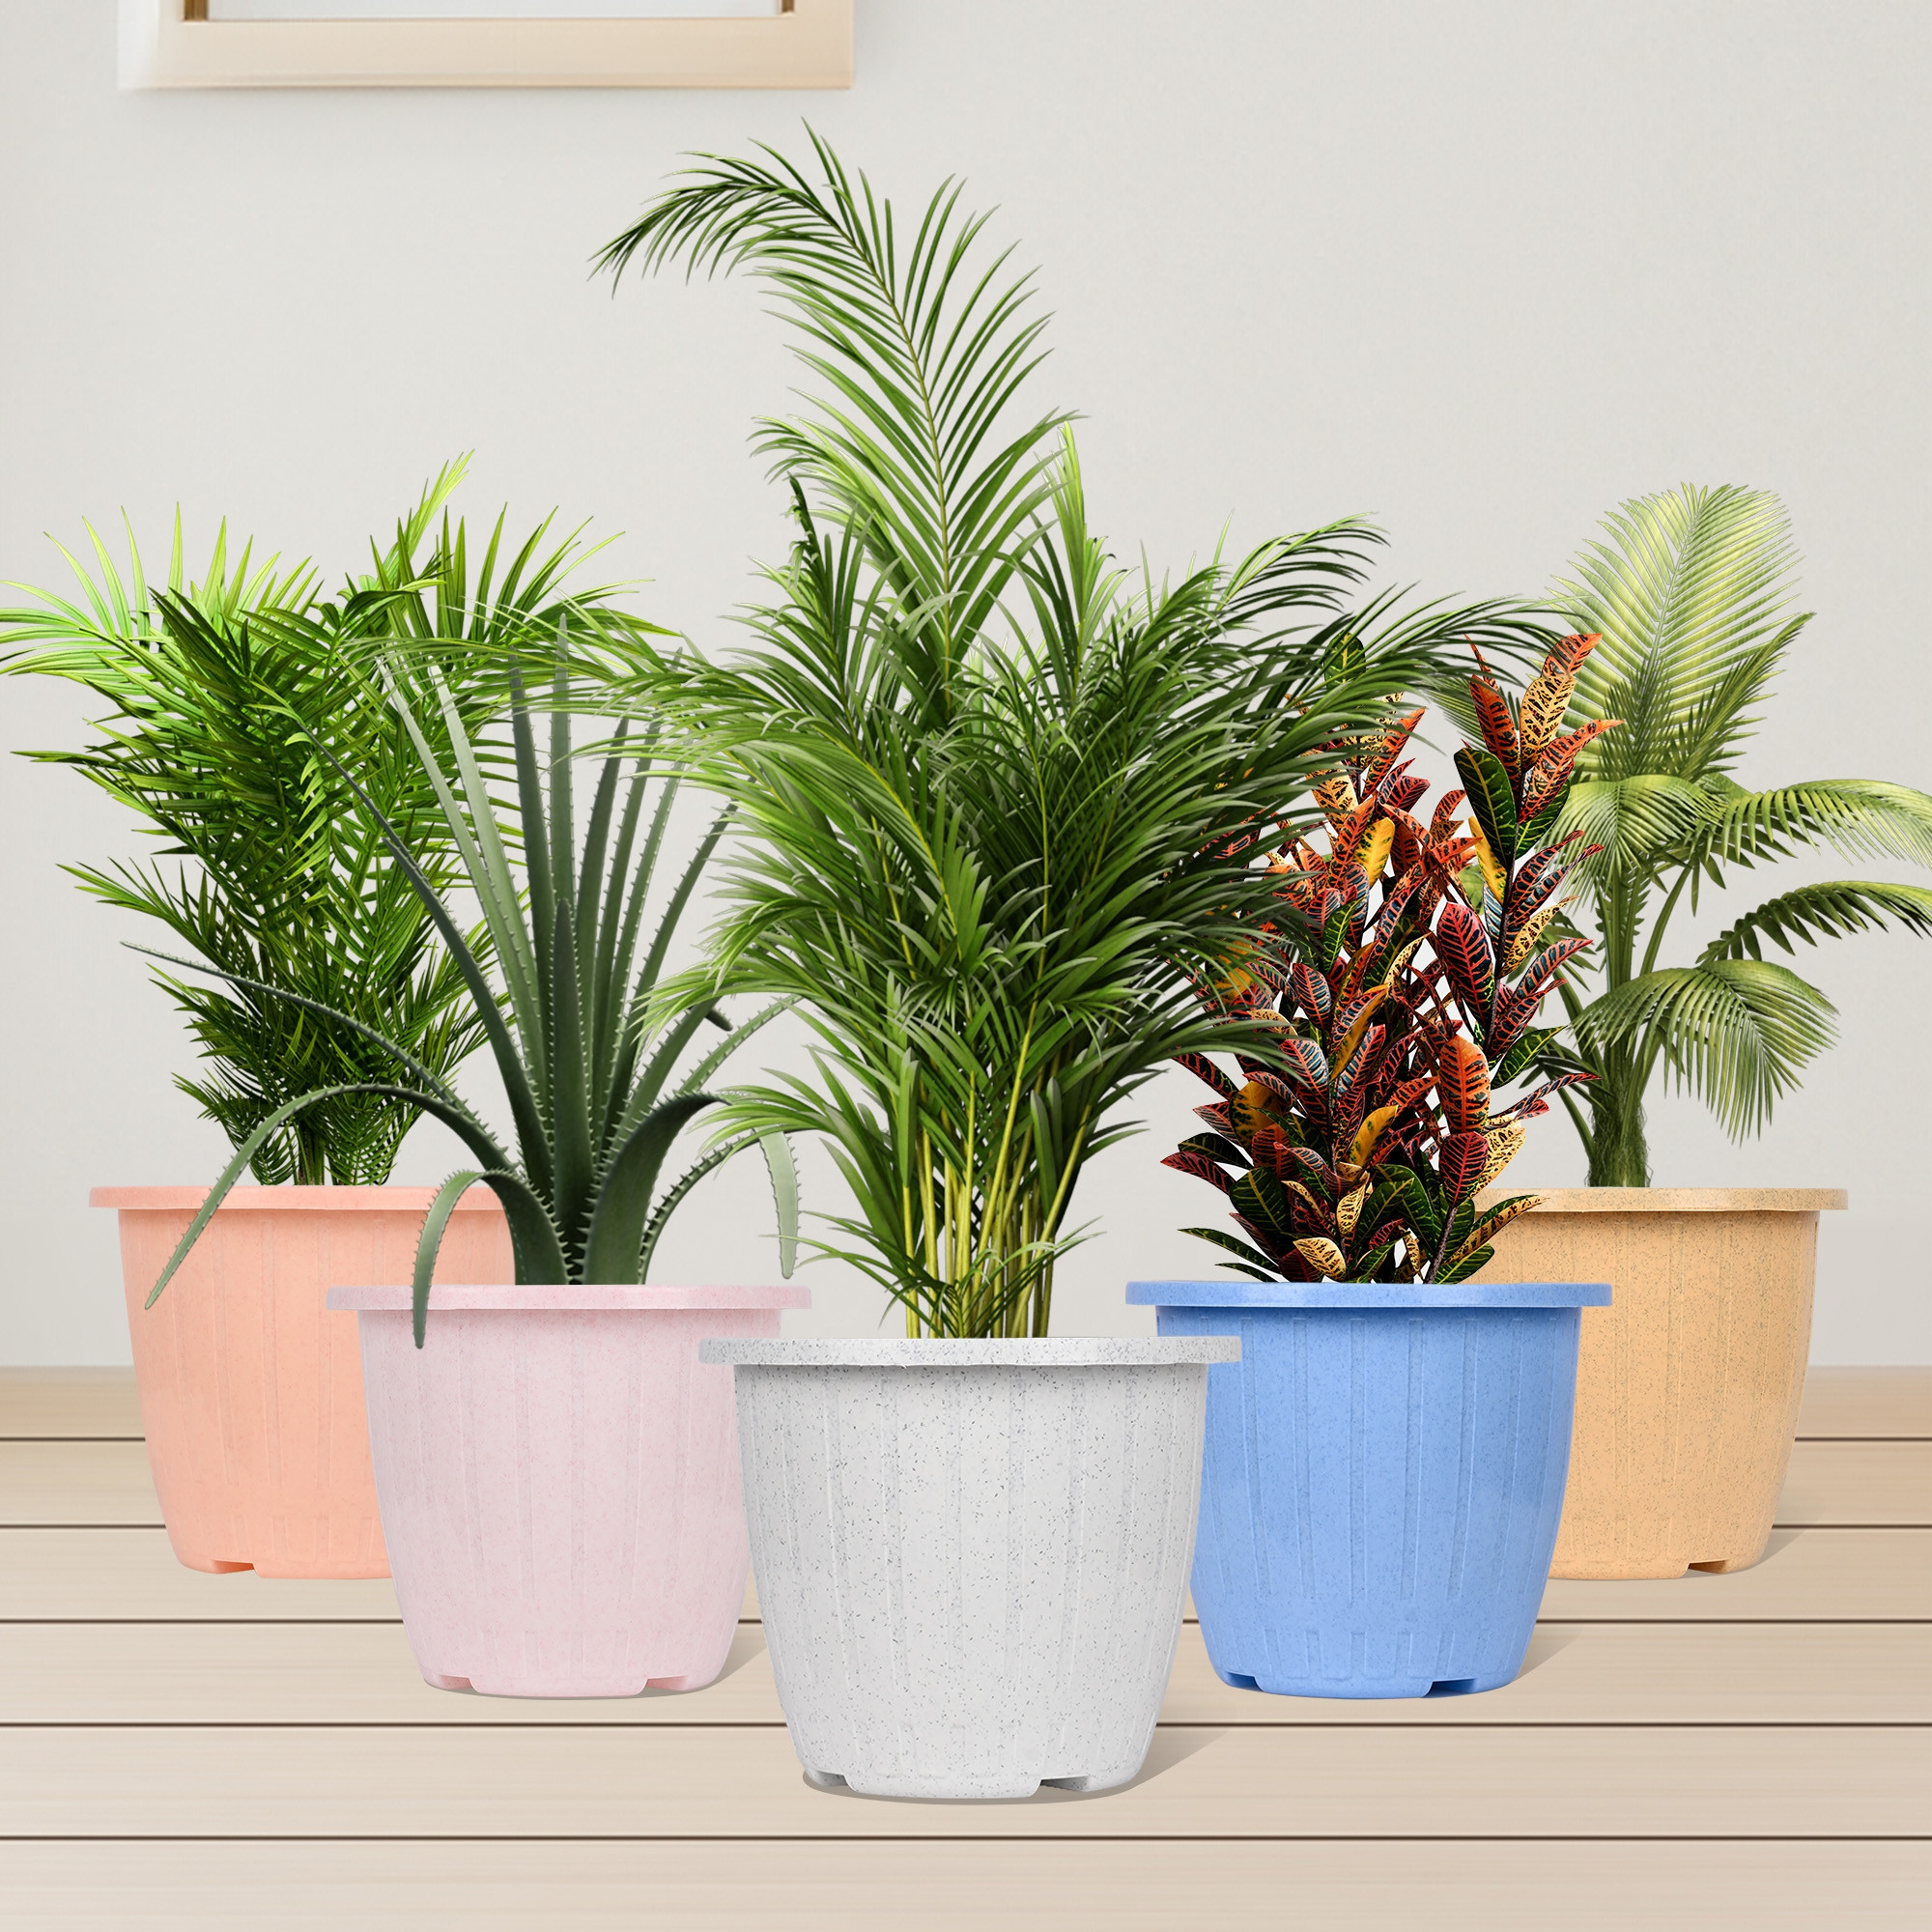 Kuber Industries Flower Pot | Flower Pot for Living Room | Planters for Home-Lawns & Gardening | Window Flower Pots for Balcony | Marble Duro | 8 Inch | White & Peach